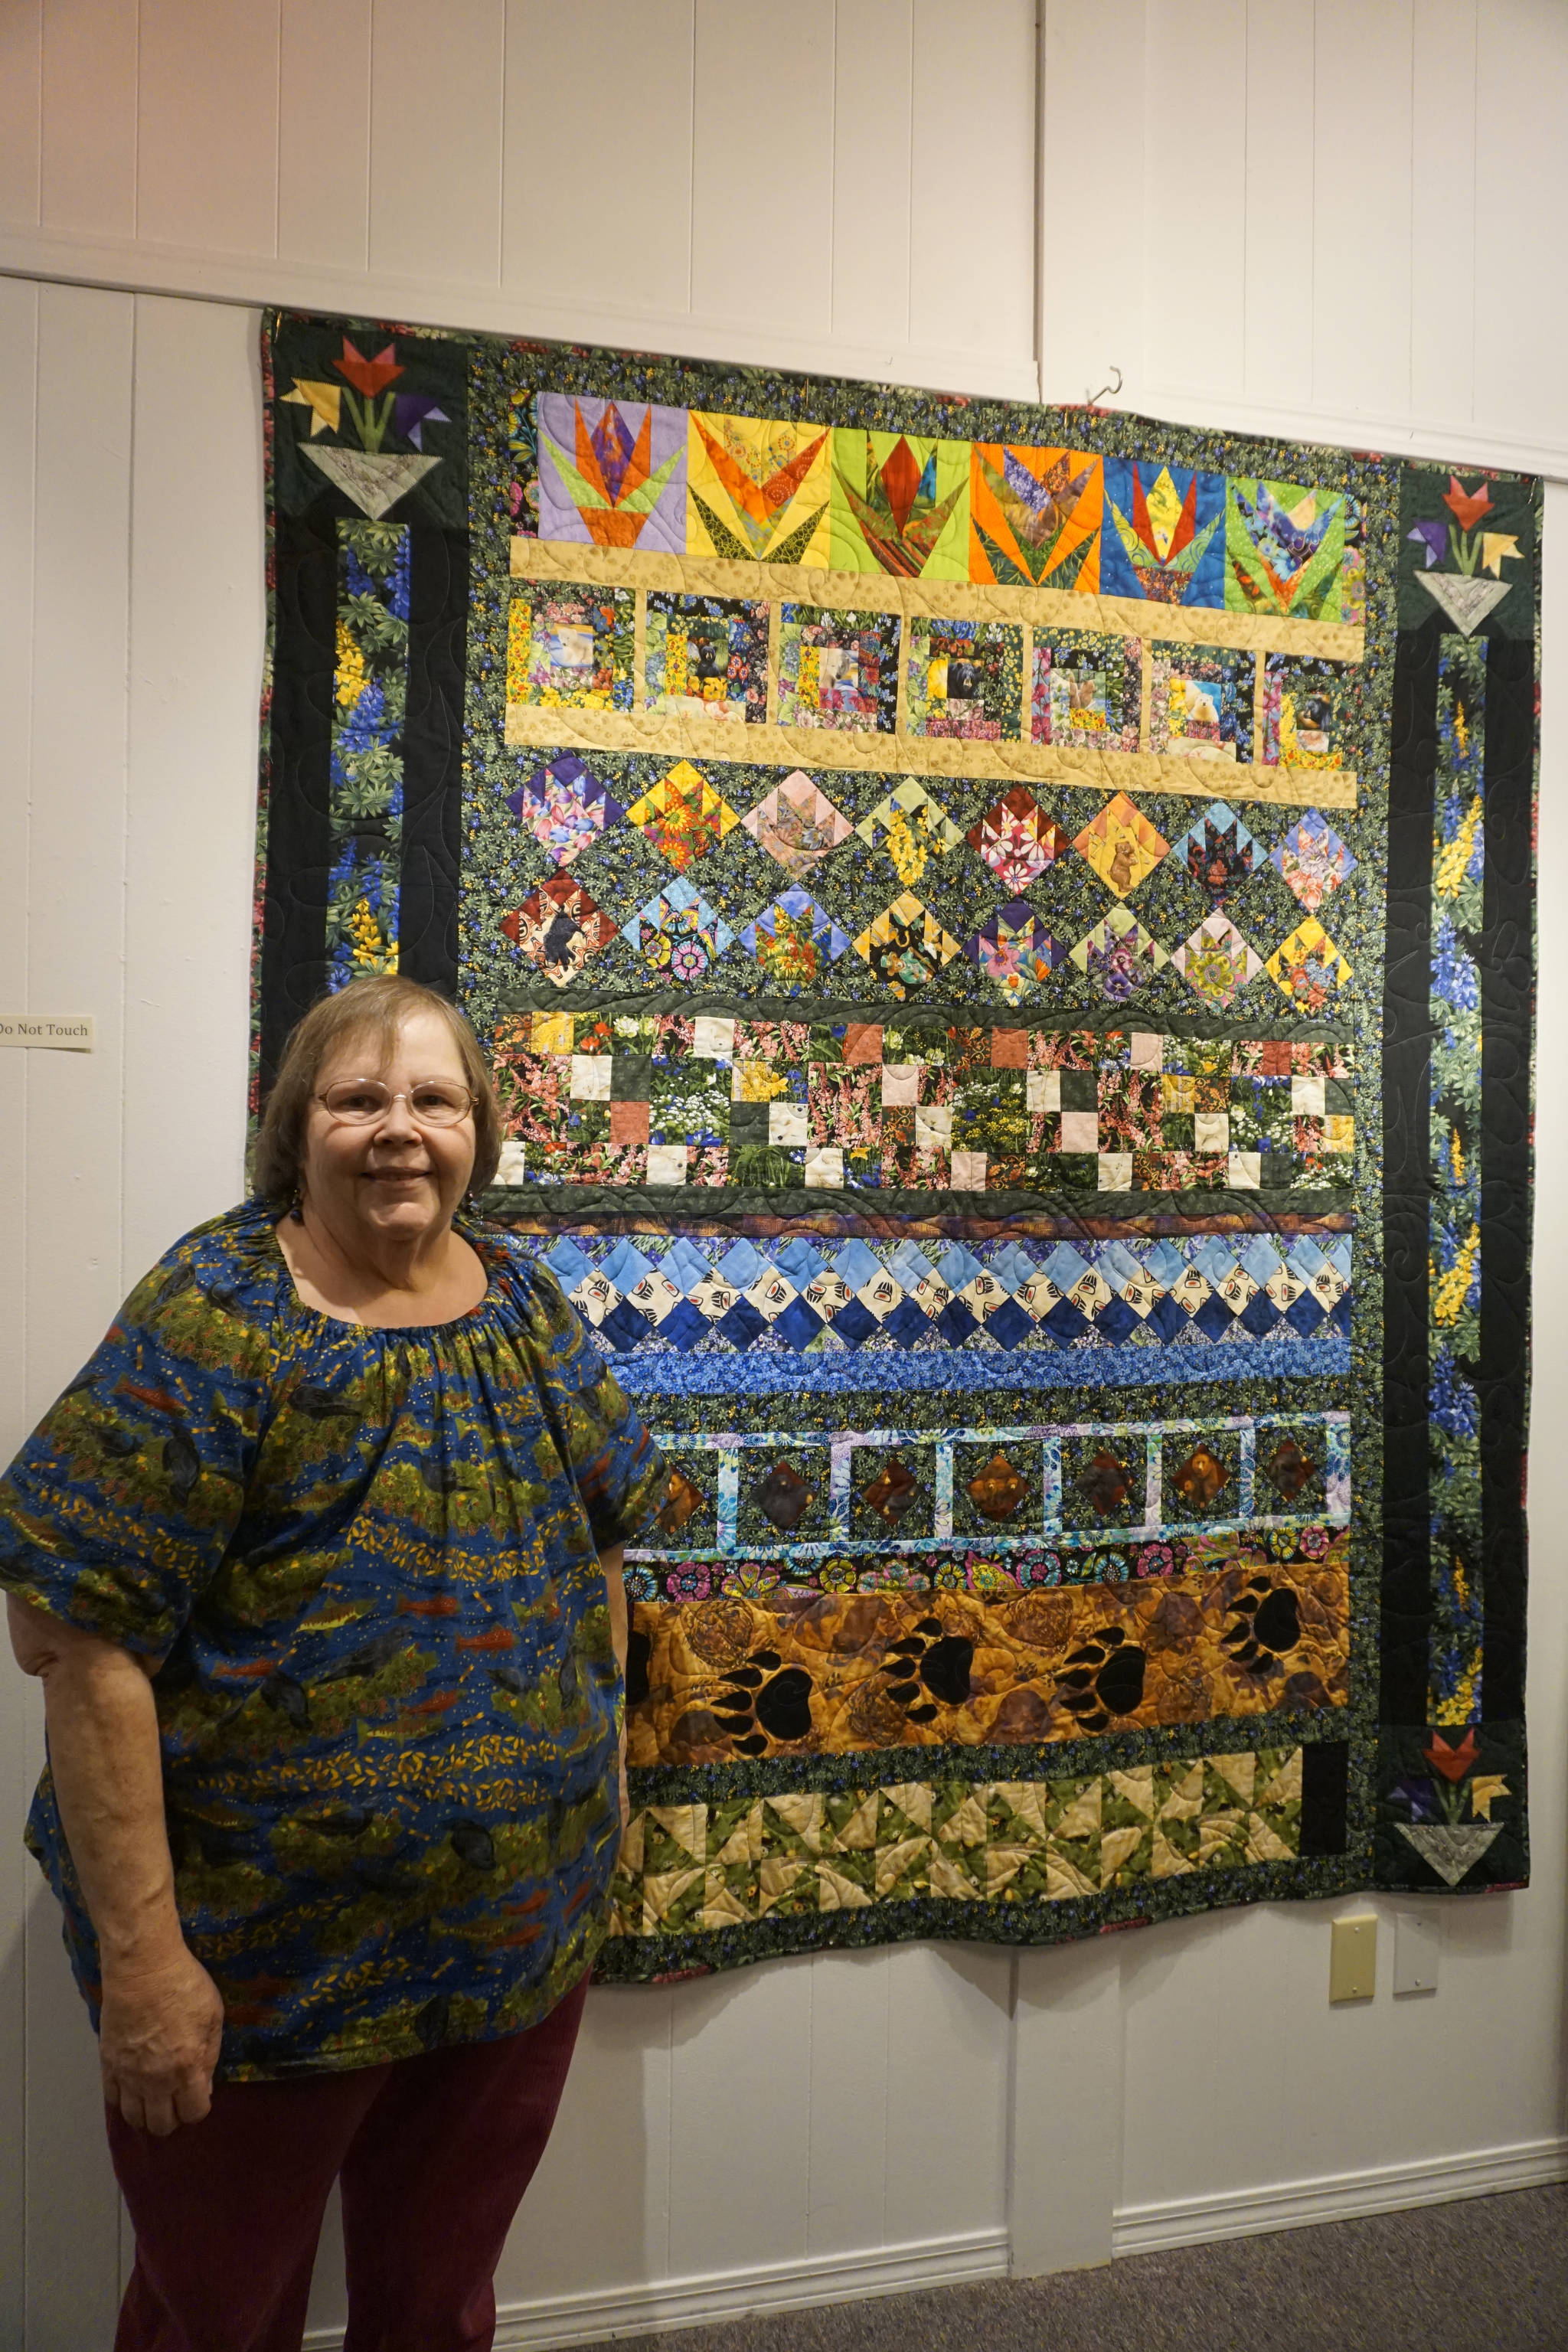 Linda Wagner stands by her “Bears and Flowers” quilt, quilt, one of the works in the “9 Women / 9 Quilts” show that opened last Friday, Feb. 1, 2019, at the Homer Council on the Arts, in Homer, Alaska. (Photo by Michael Armstrong/Homer News)